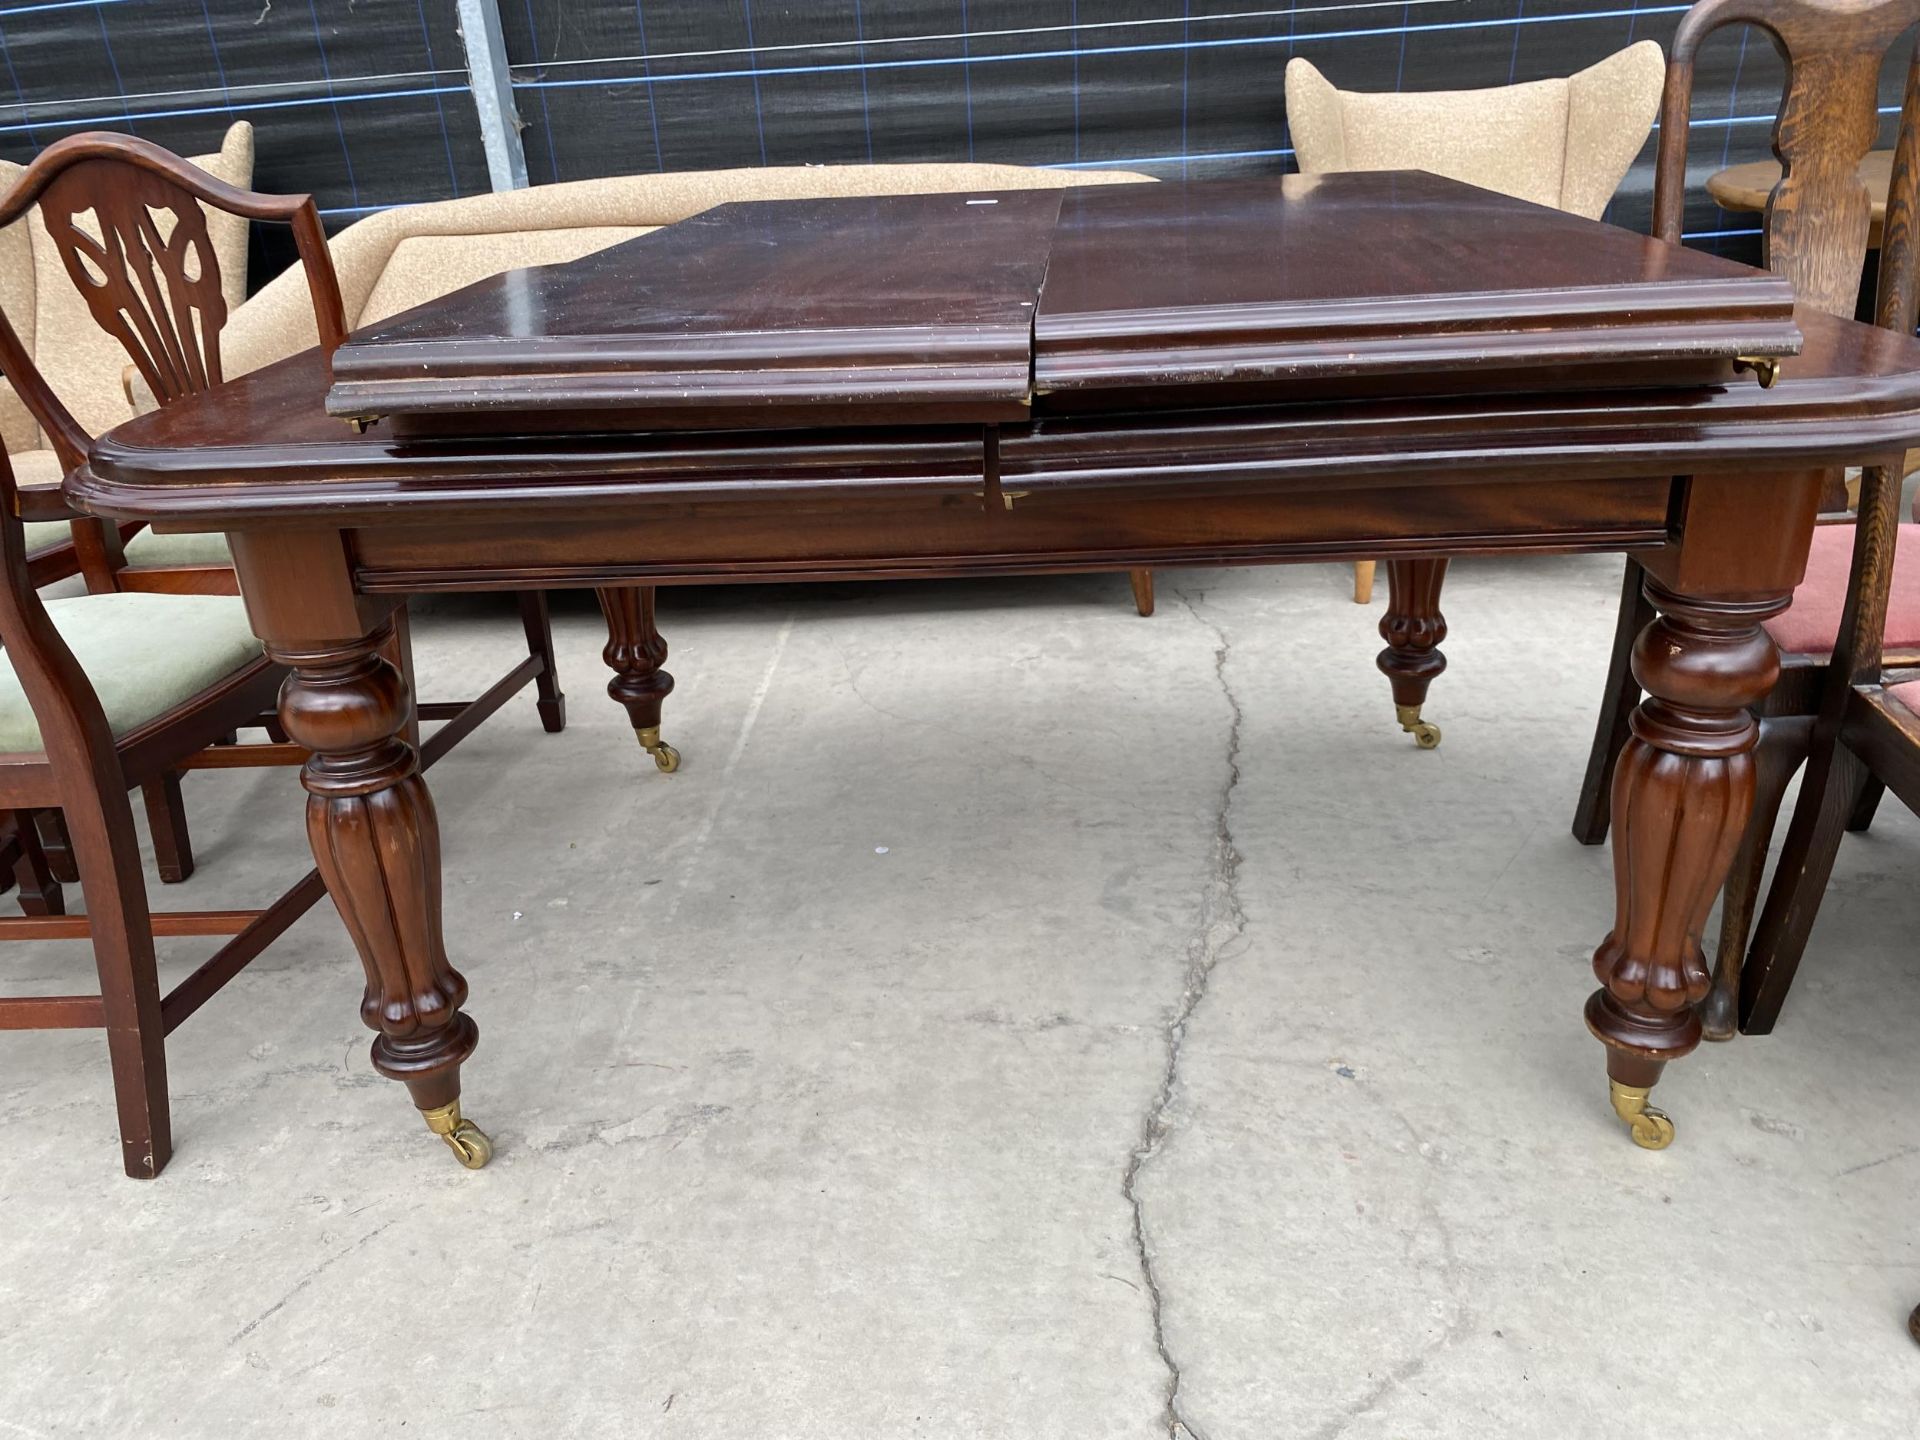 A VICTORIAN STYLE MAHOGANY PULL-OUT DINING TABLE, 59X48" (TWO LEAVES 19" EACH) - Image 2 of 3